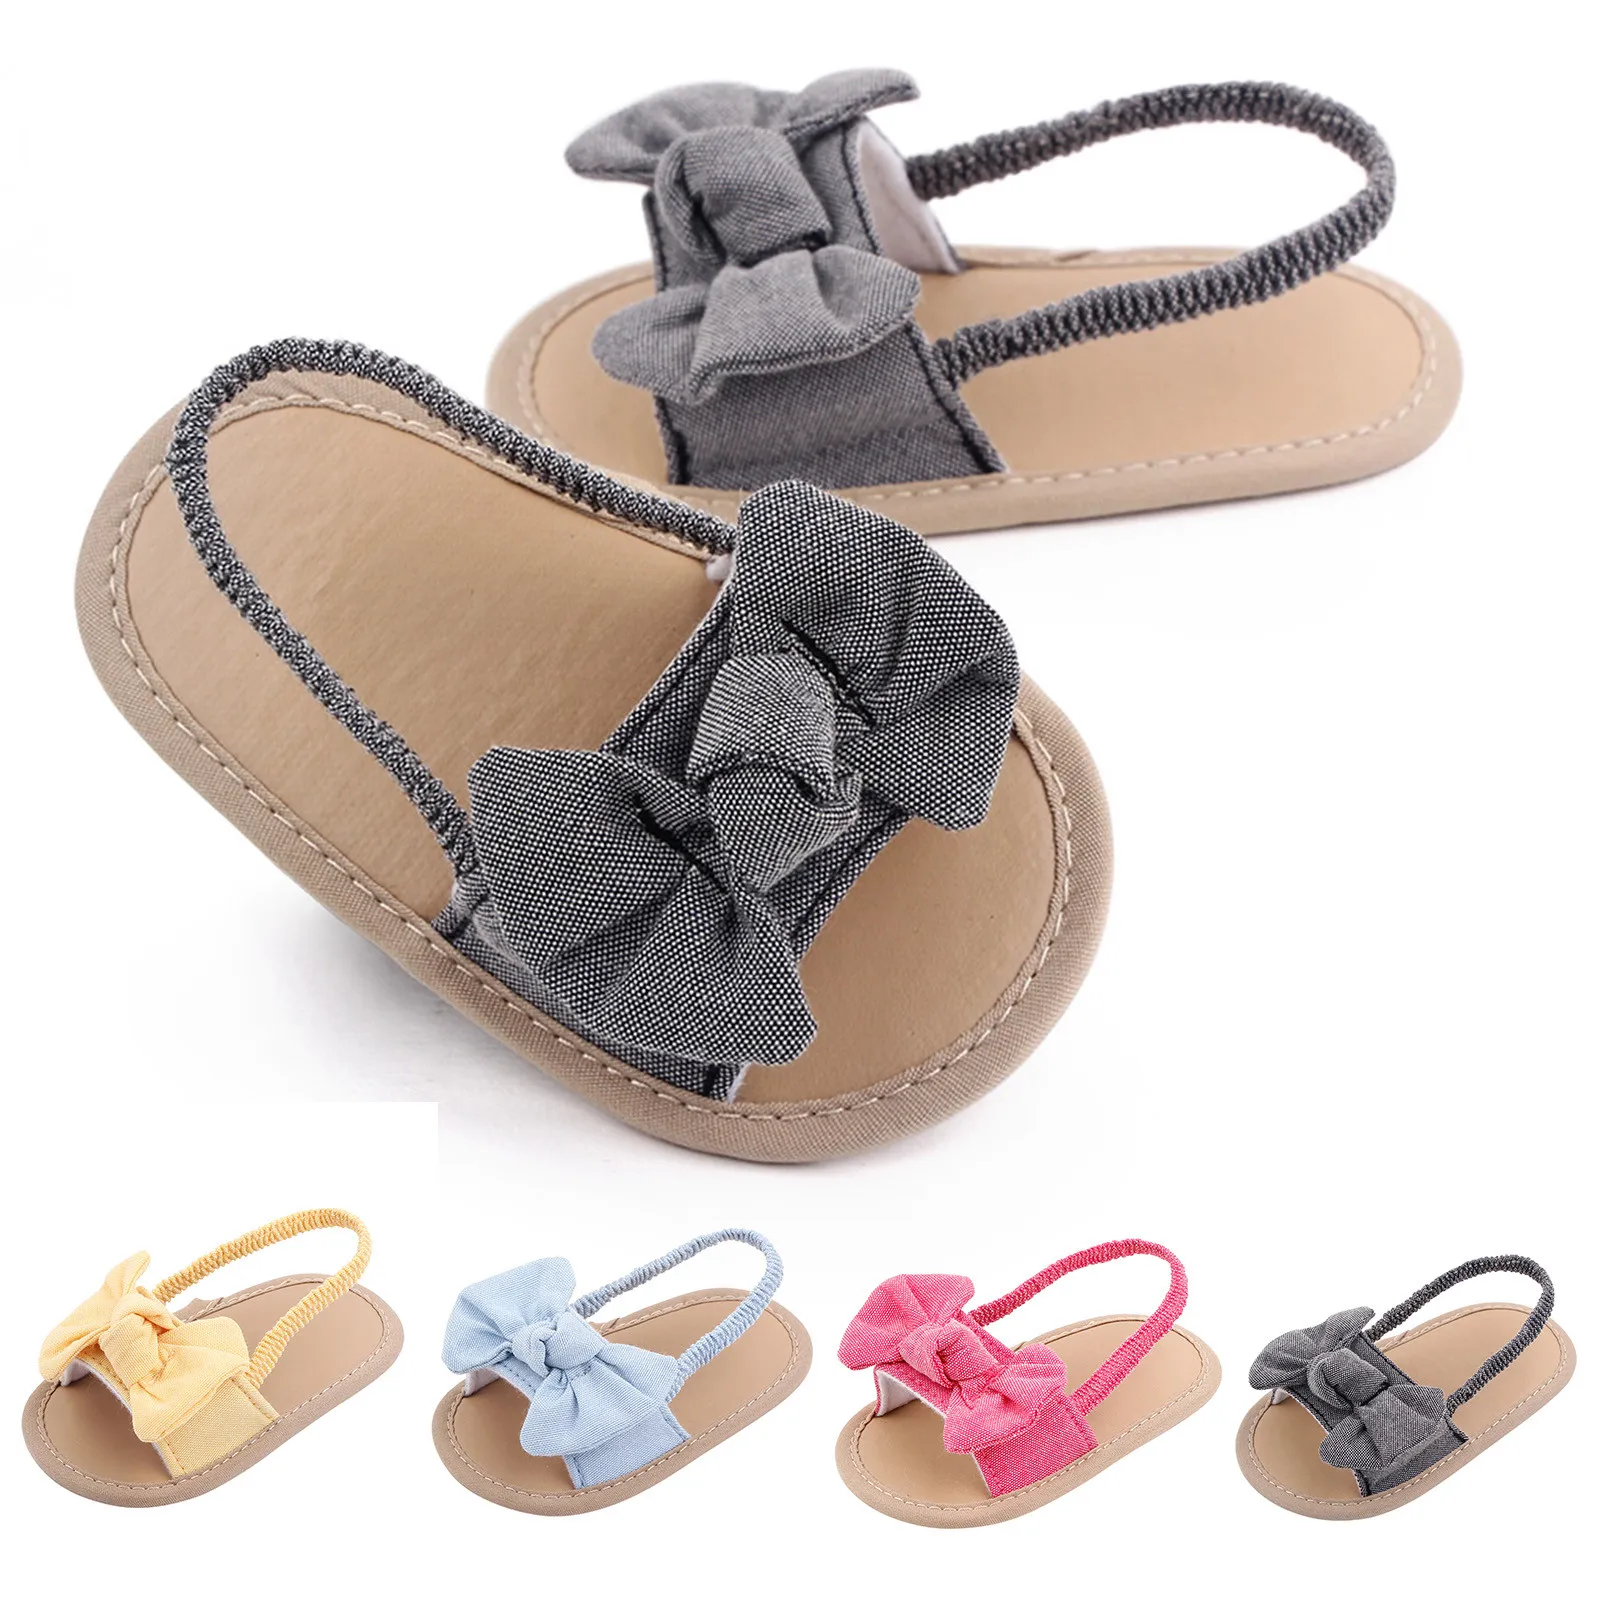 

Baby Toddler Kids Girls Baby Shoes Bowknot The Floor Barefoot Non-slip First Walkers Prewalker Sandals For Newborn Infant 0-18M